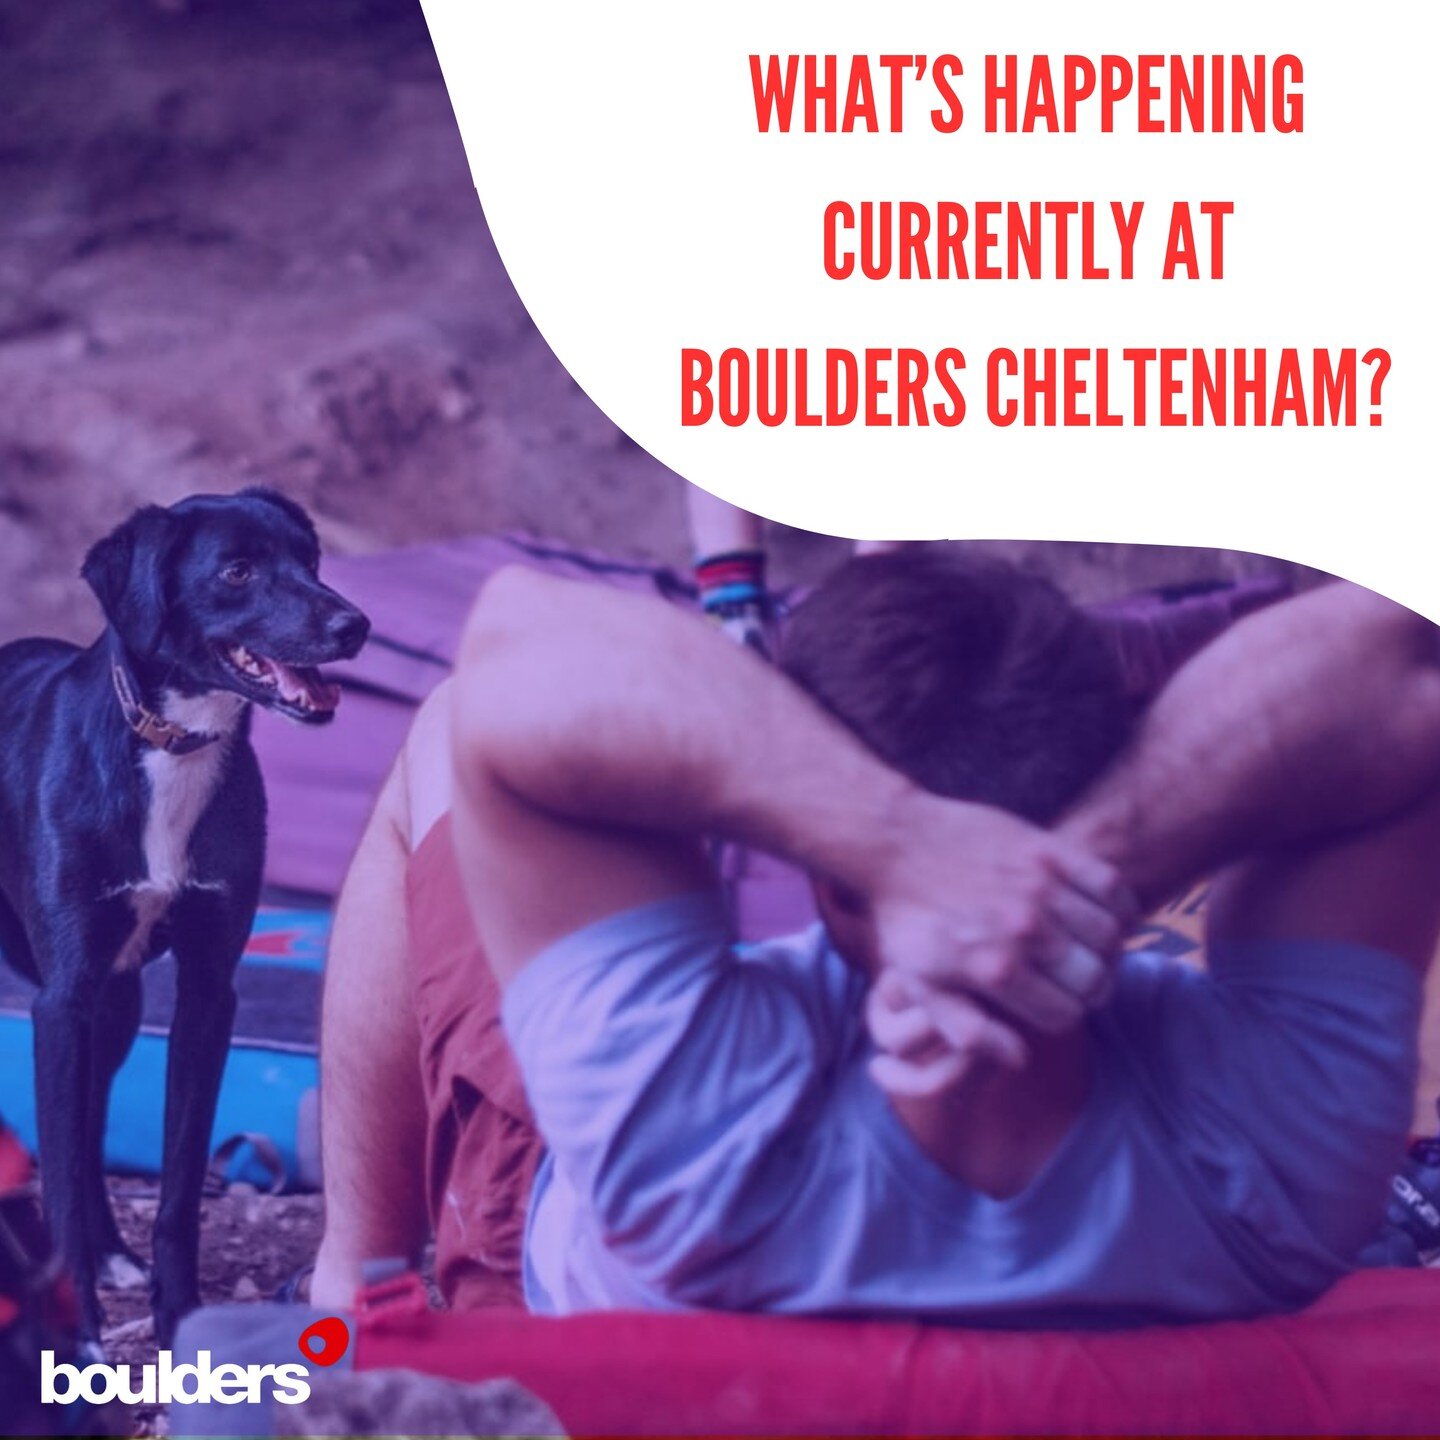 Not sure what's currently available at Cheltenham Boulders?

Don't worry we've got you covered!

#boulder #boulders #climbmoreclimbhappy #chelt #thingstodoincheltenham #boulders #bouldersuk #boulderuk #climb #boulderer #cheltenham #bouldering #climbi